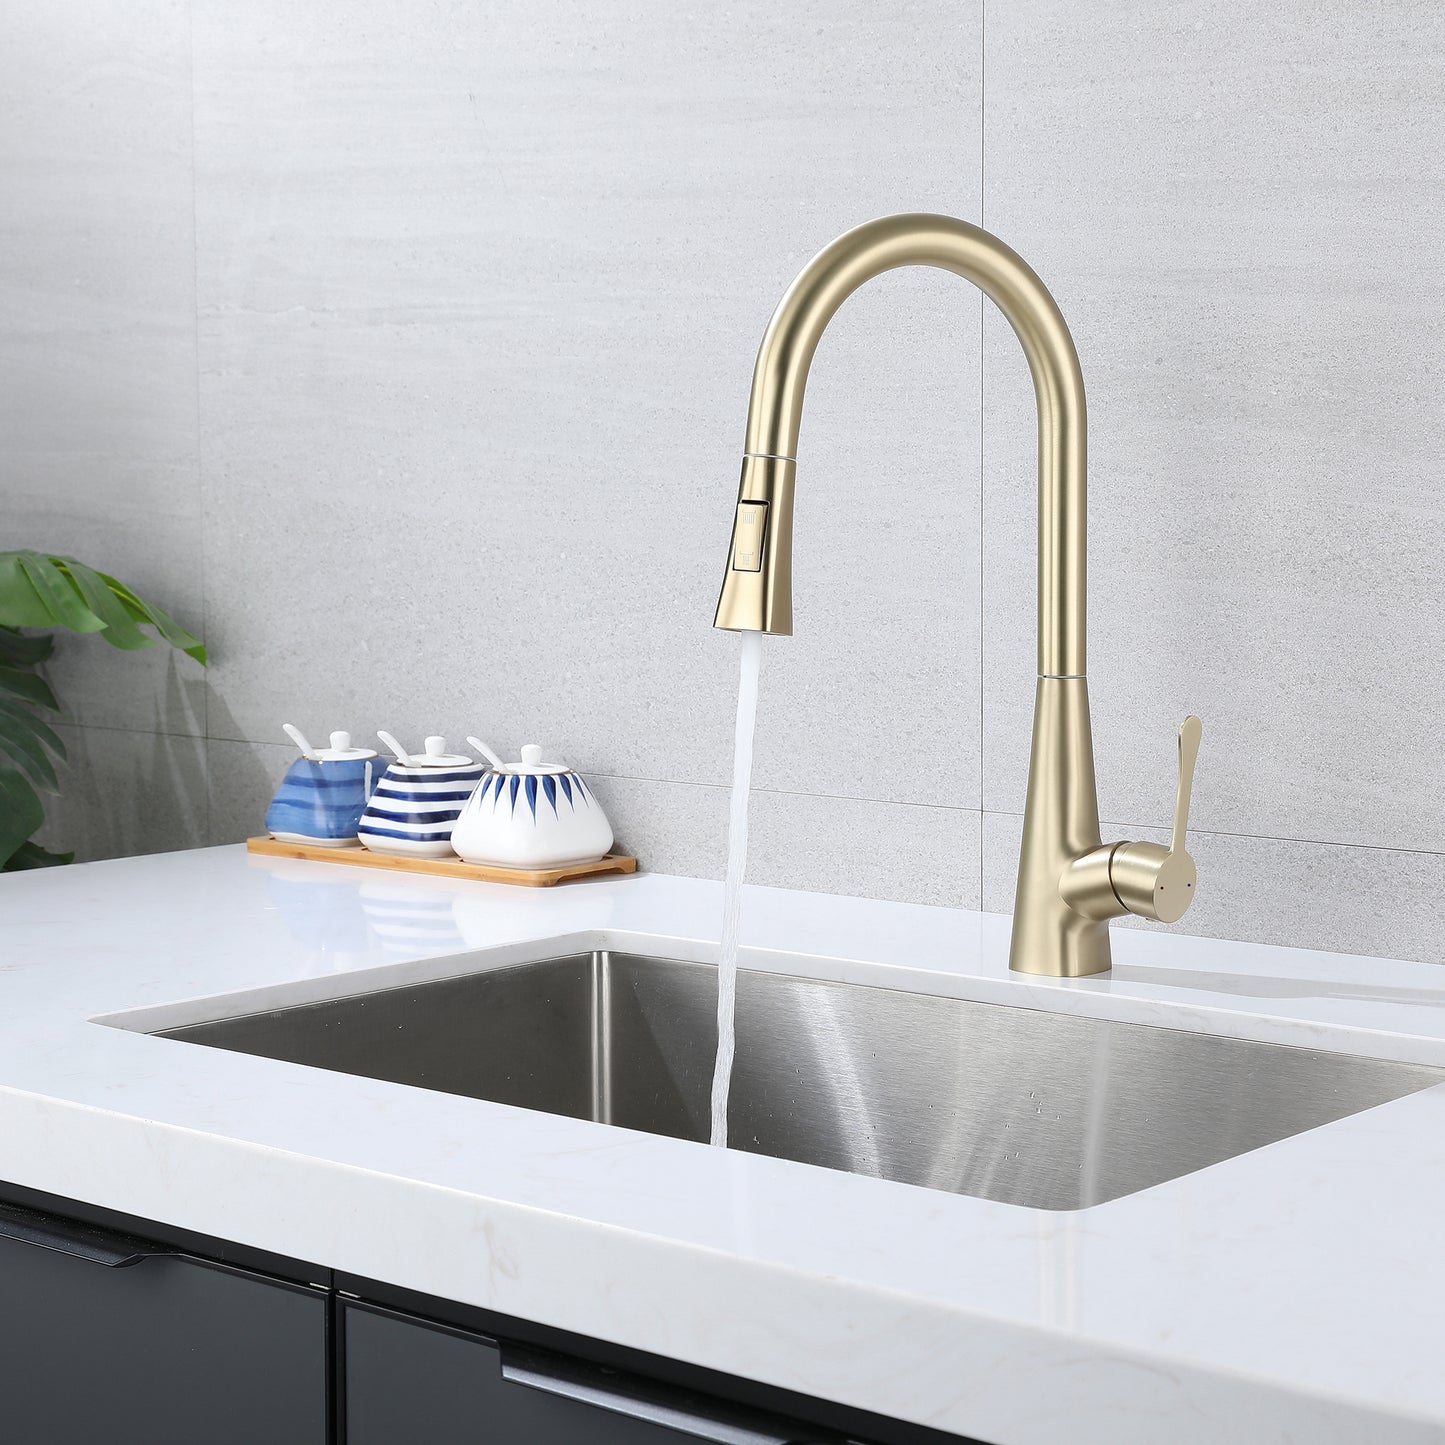 AvaMalis A|M Aquae Kitchen Faucet with Pull Down Sprayer Brushed Gold, High Arc Single Handle Kitchen Sink Faucet , Commercial Modern Stainless Steel Kitchen Faucets